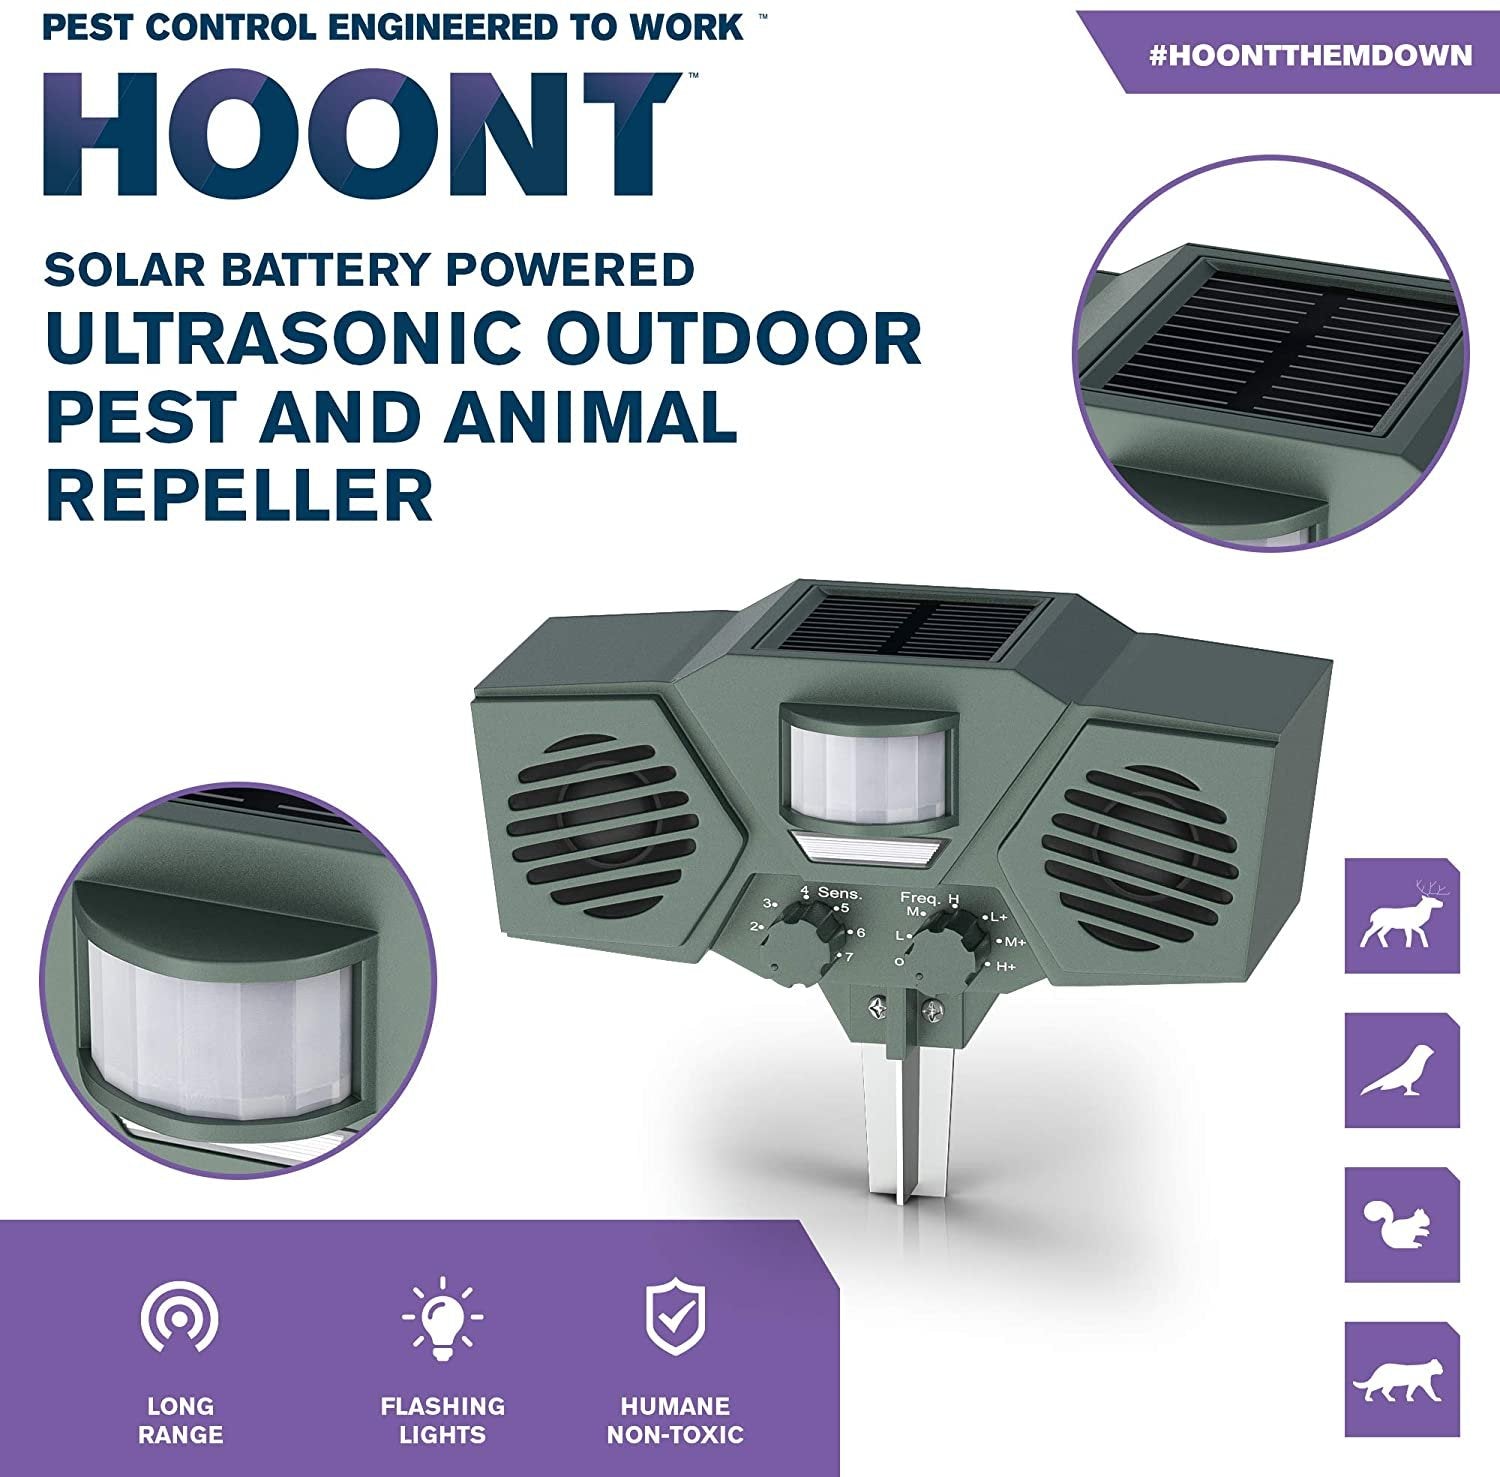 Hoont Solar Ultrasonic Animal Repeller, Motion-Activated Outdoor Pest Control (Green, )